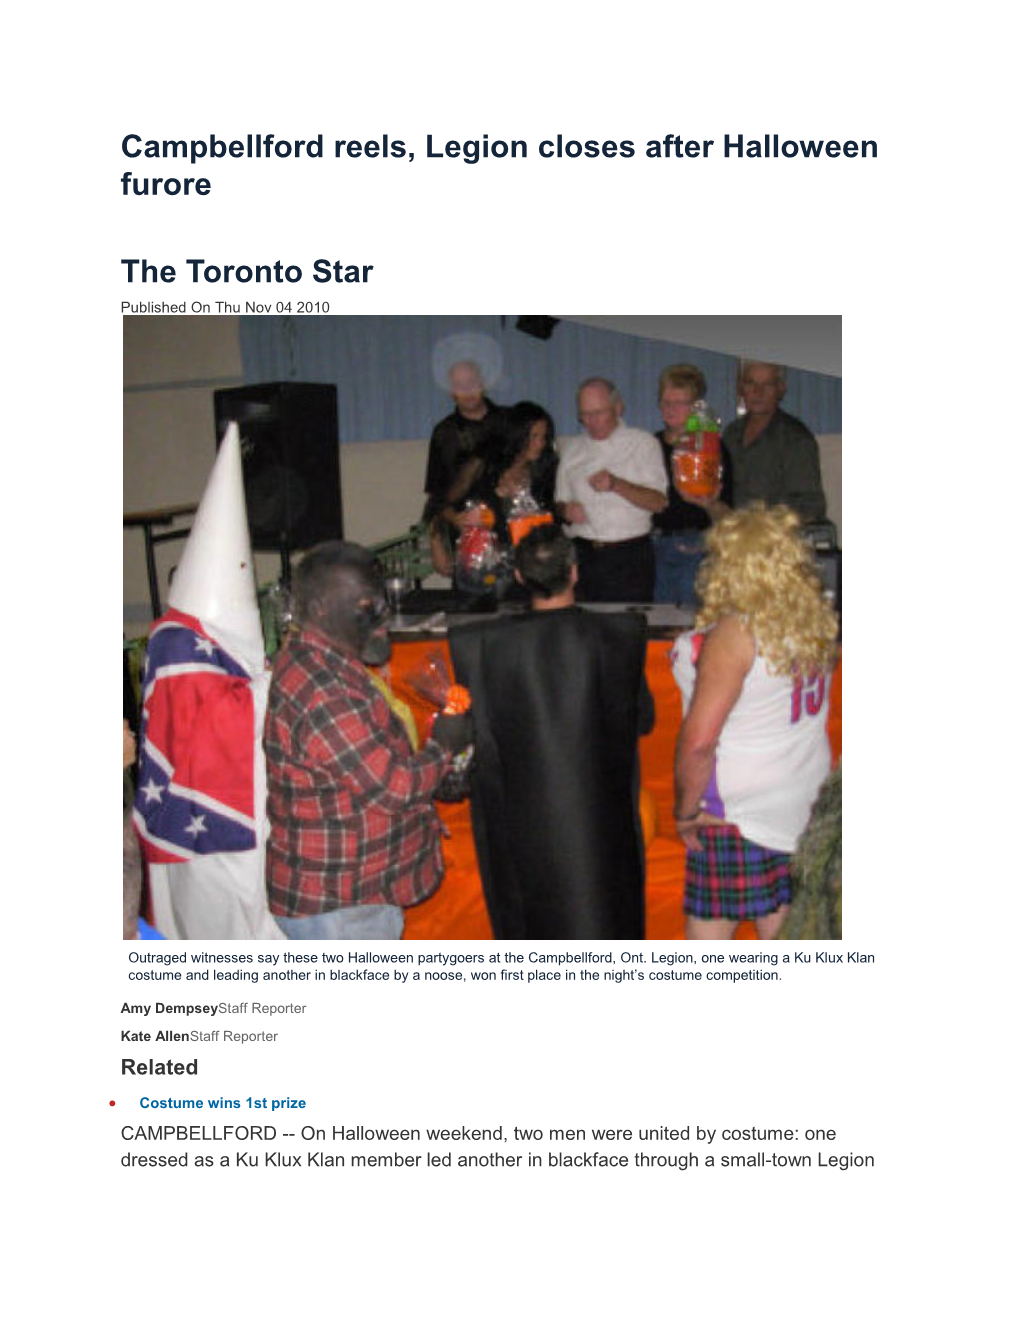 Campbellford Reels, Legion Closes After Halloween Furore the Toronto Star